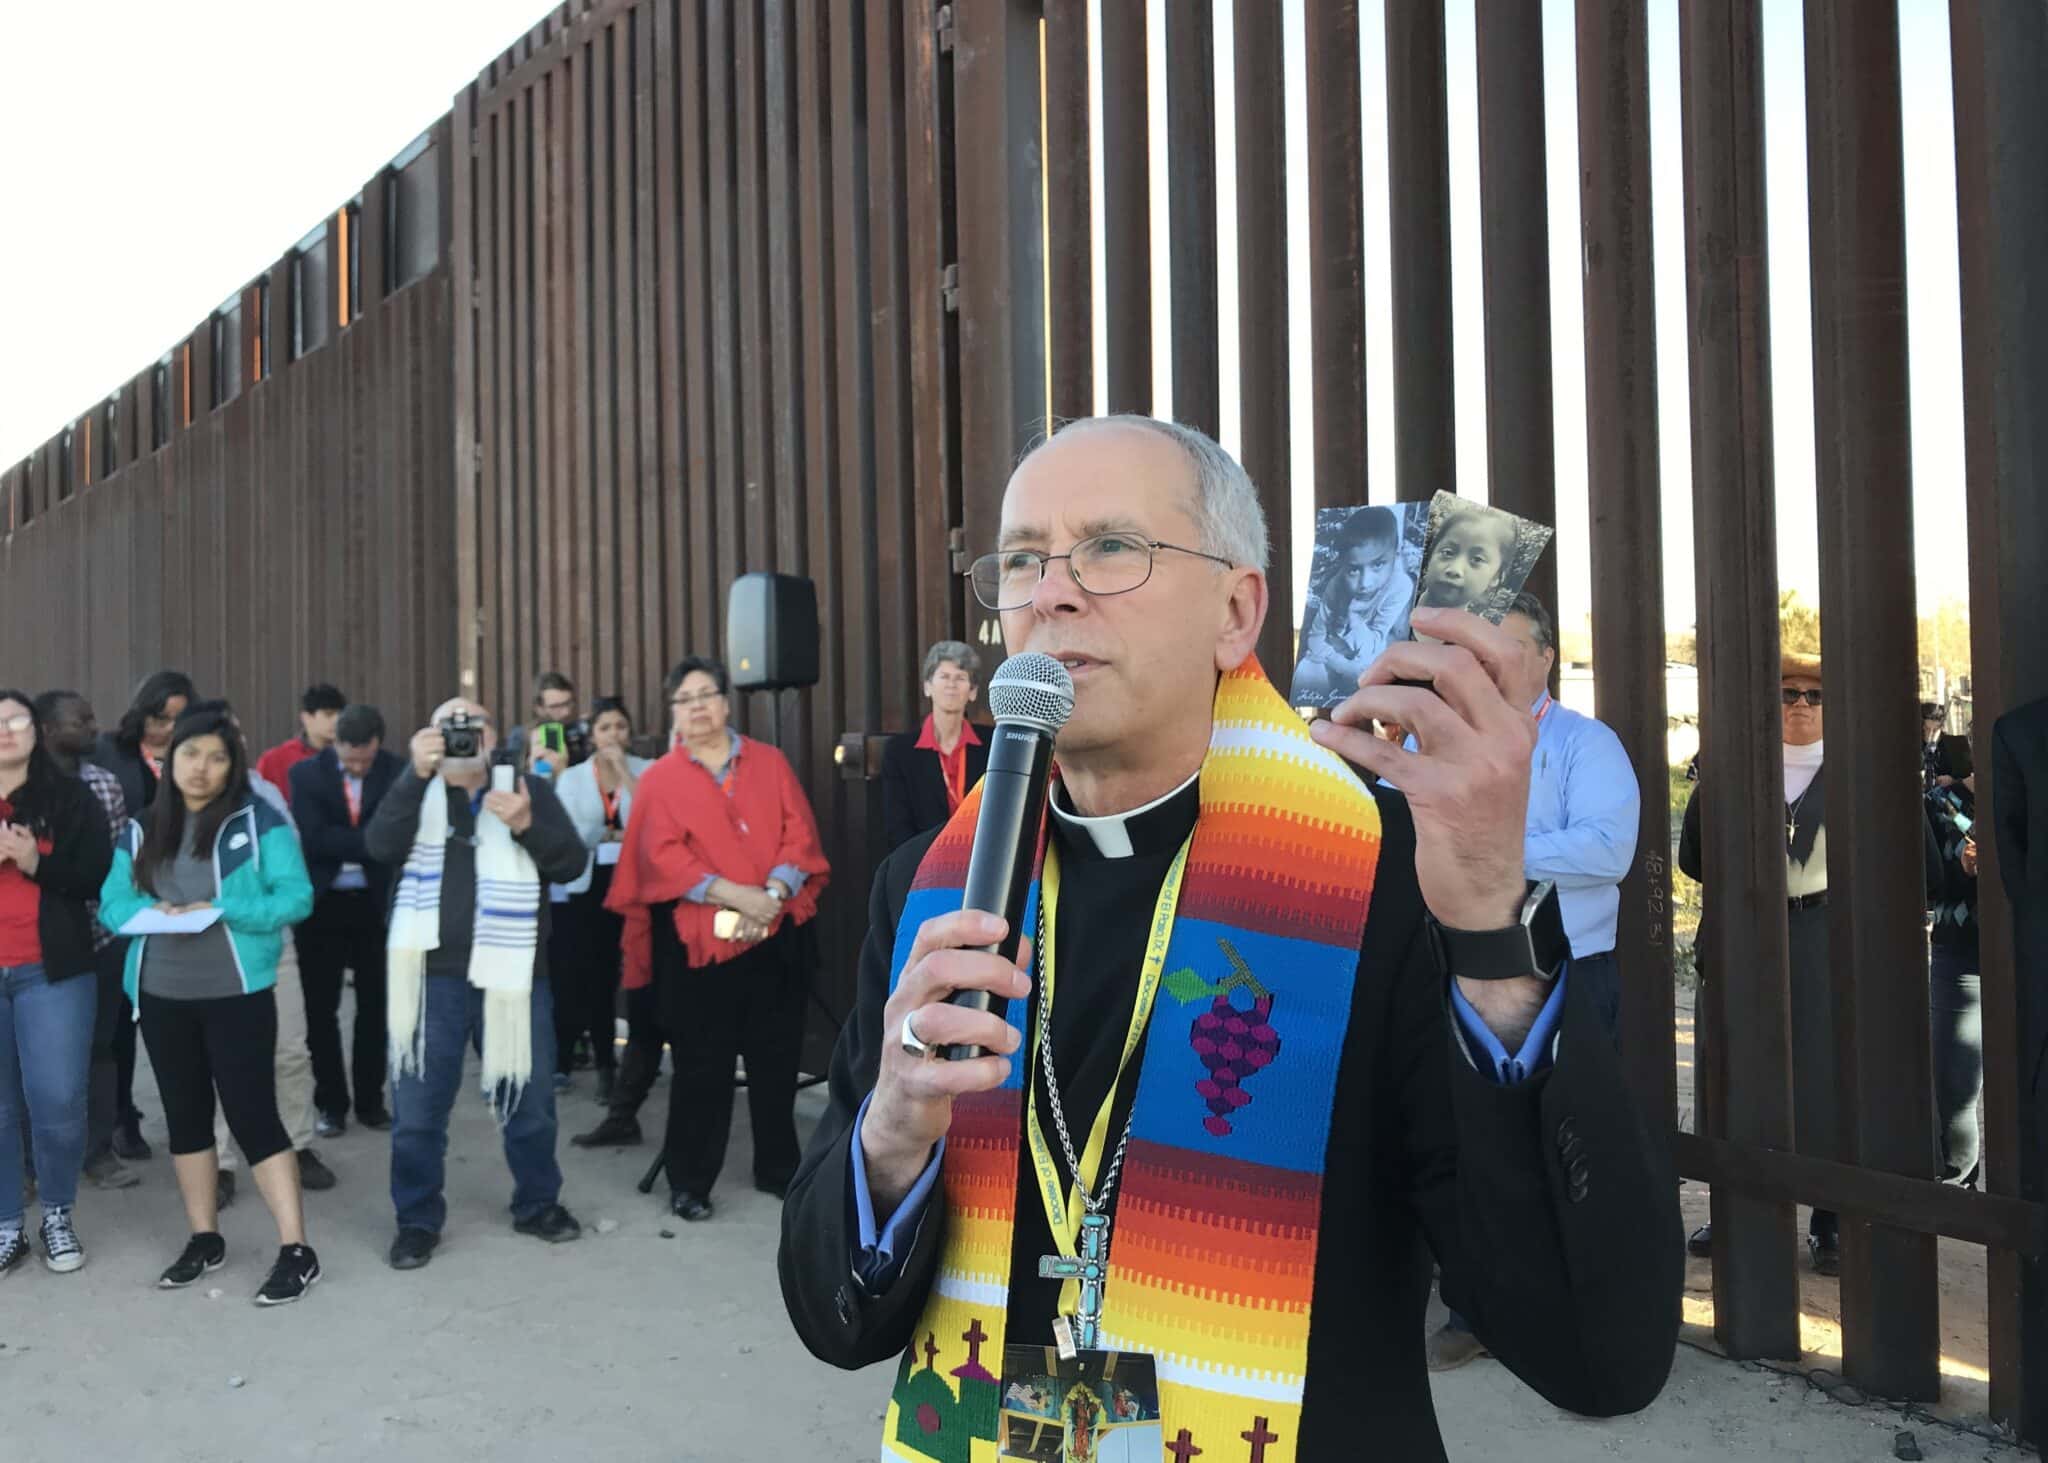 Bishop Mark J. Seitz of El Paso, Texas, is seen Feb. 26, 2019, at the U.S.-Mexico border wall. Bishop Seitz is currently the chairman of the U.S. Conference of Catholic Bishops' Committee on Migration. (OSV News photo/David Agren)